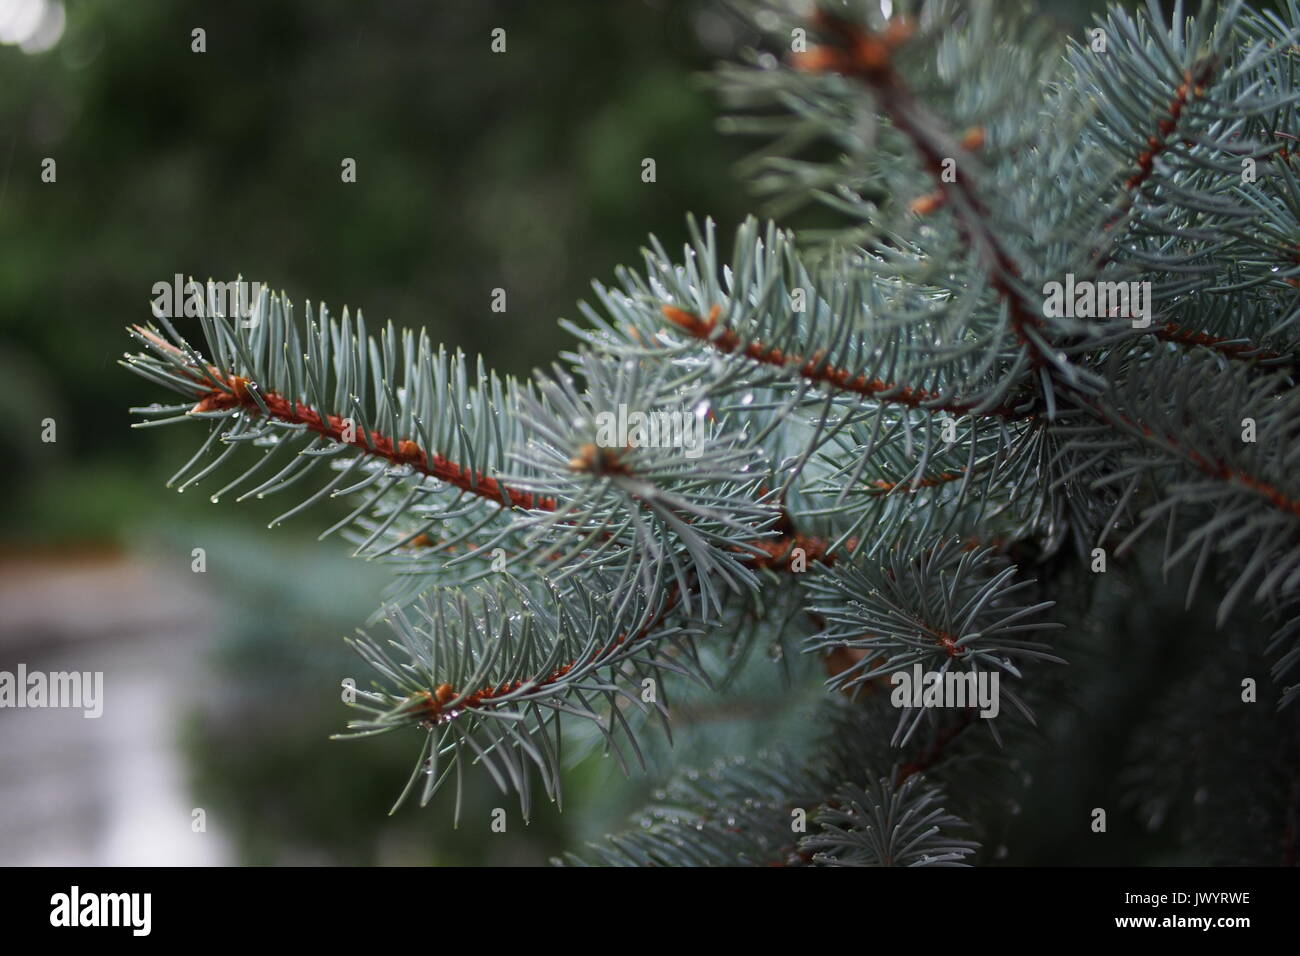 Water droplets on a blue spruce branch in a Glebe garden, Ottawa, Ontario, Canada. Stock Photo